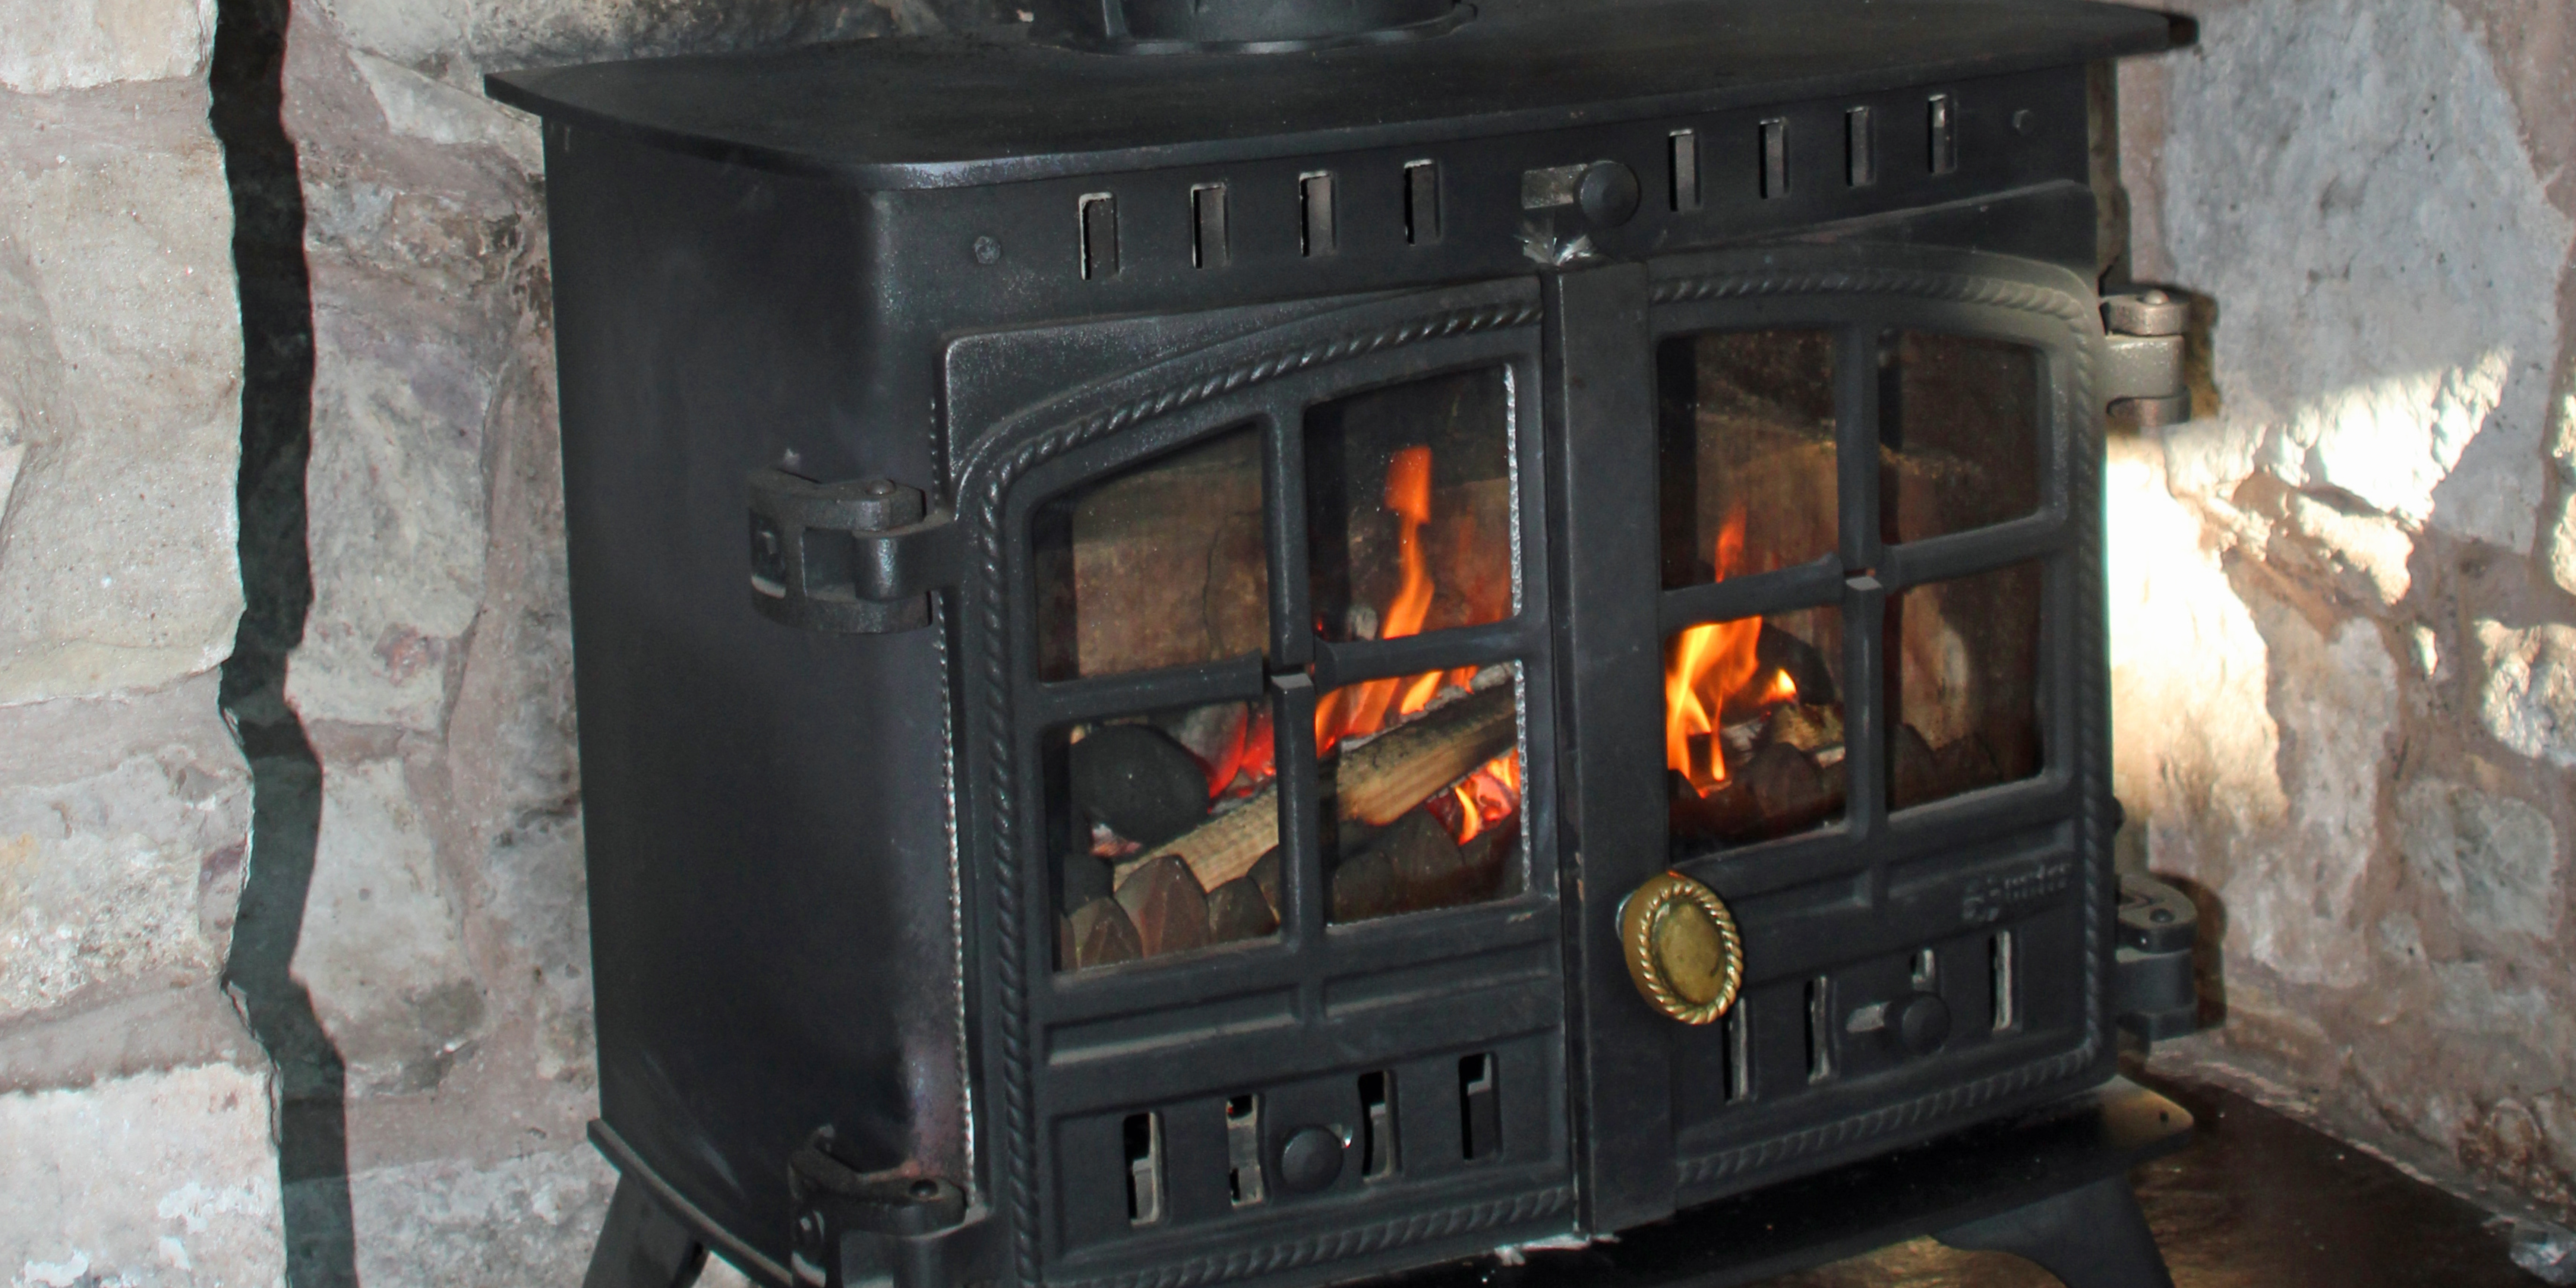 Using solid fuel safely